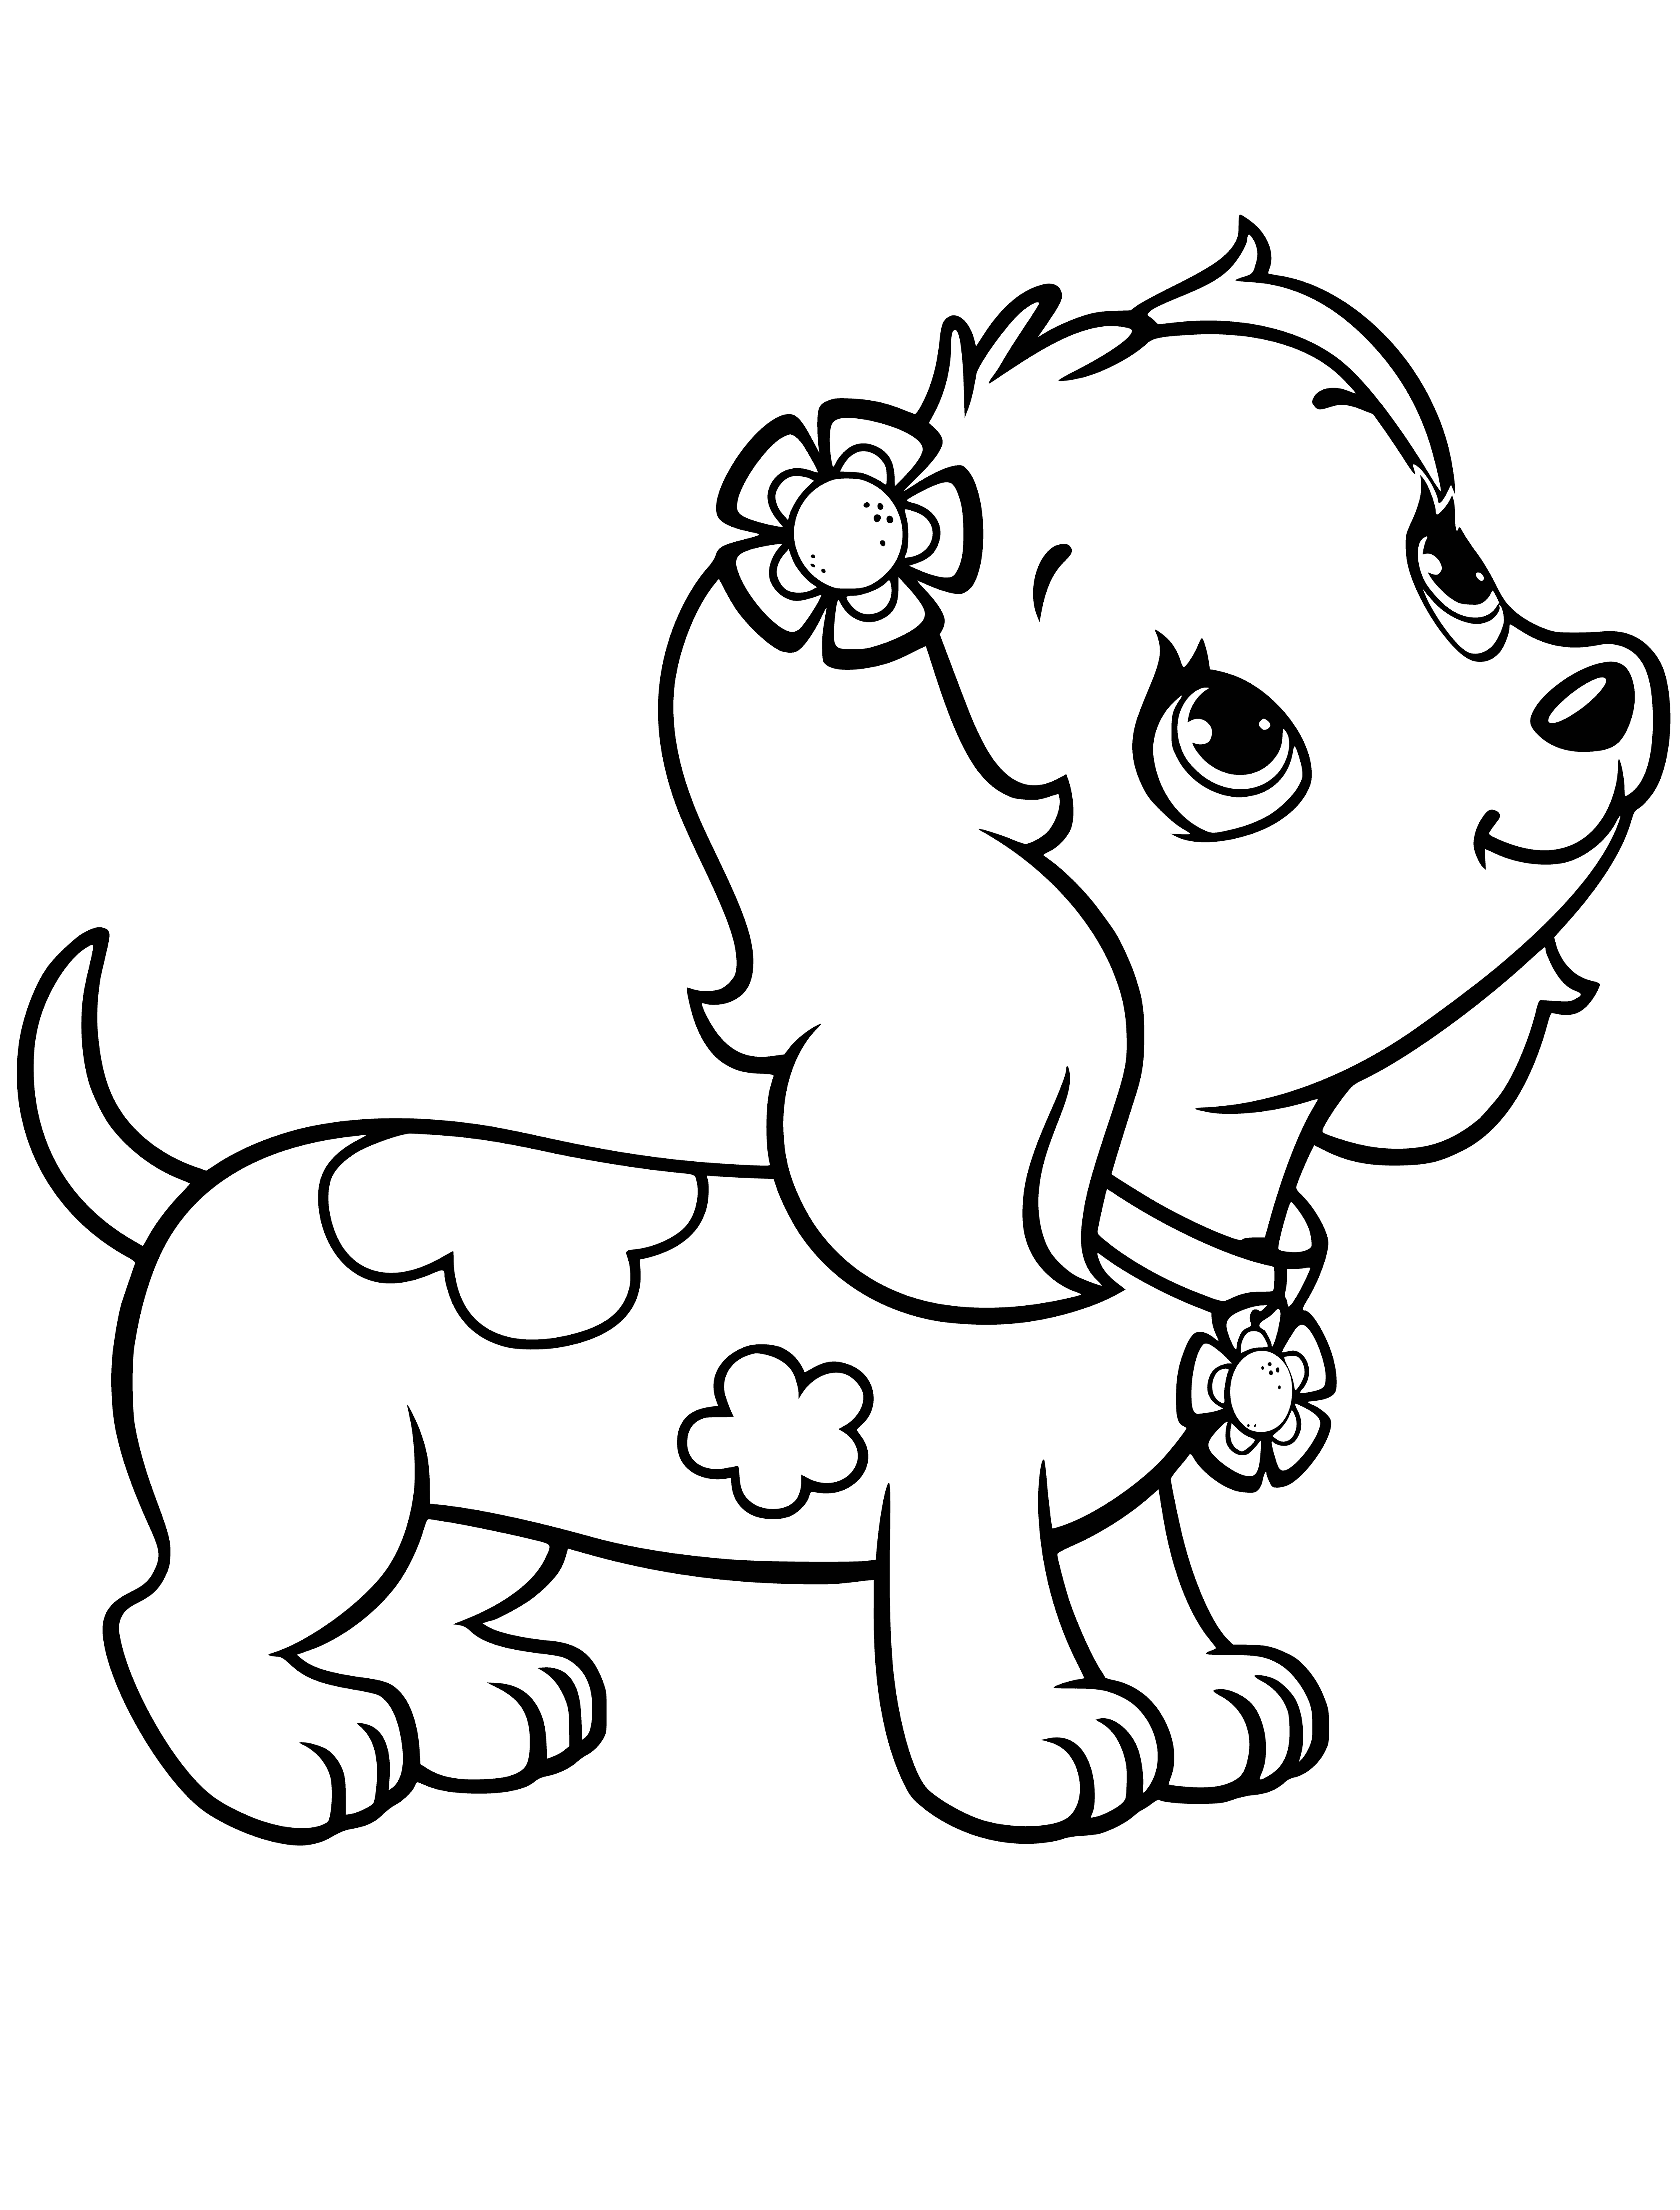 coloring page: A gummy pet: orange, with eyes, mouth, stubby arms and legs.